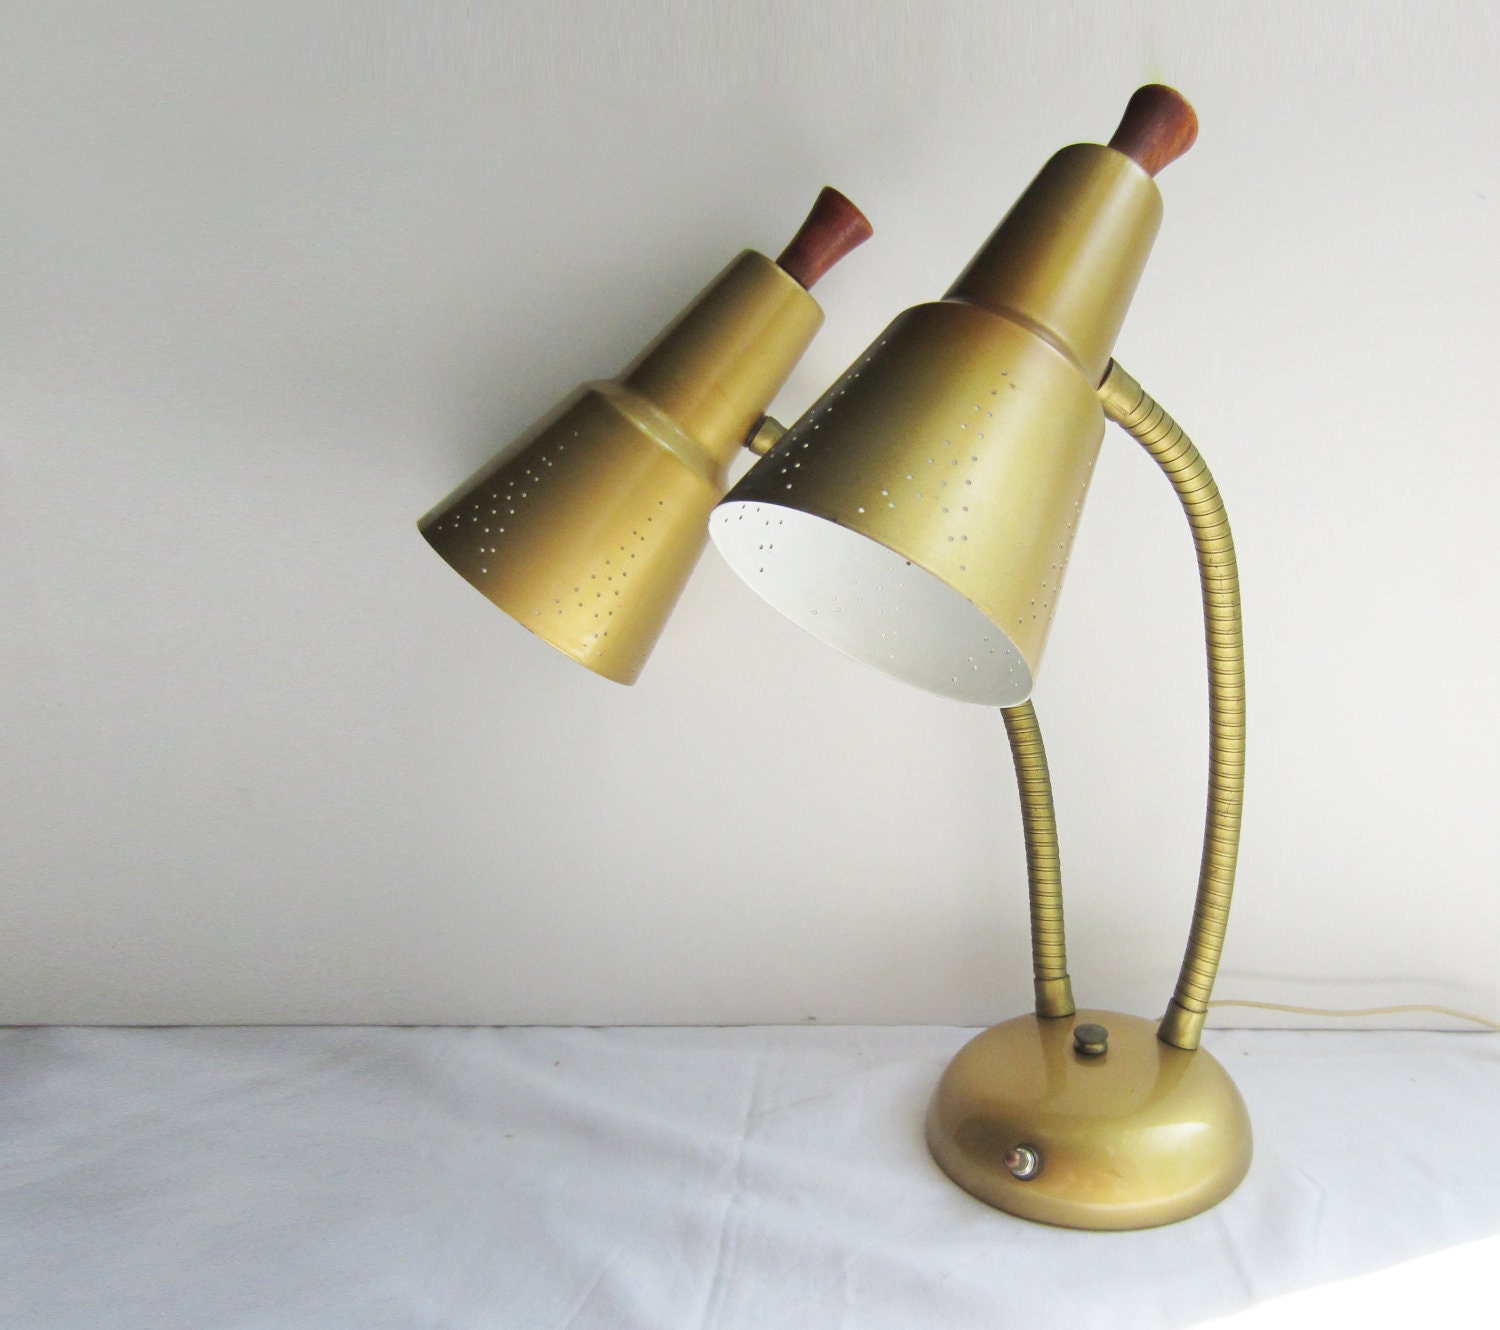 Vintage Mid Century Double Gooseneck Desk Lamp - Gold with Wood Knobs